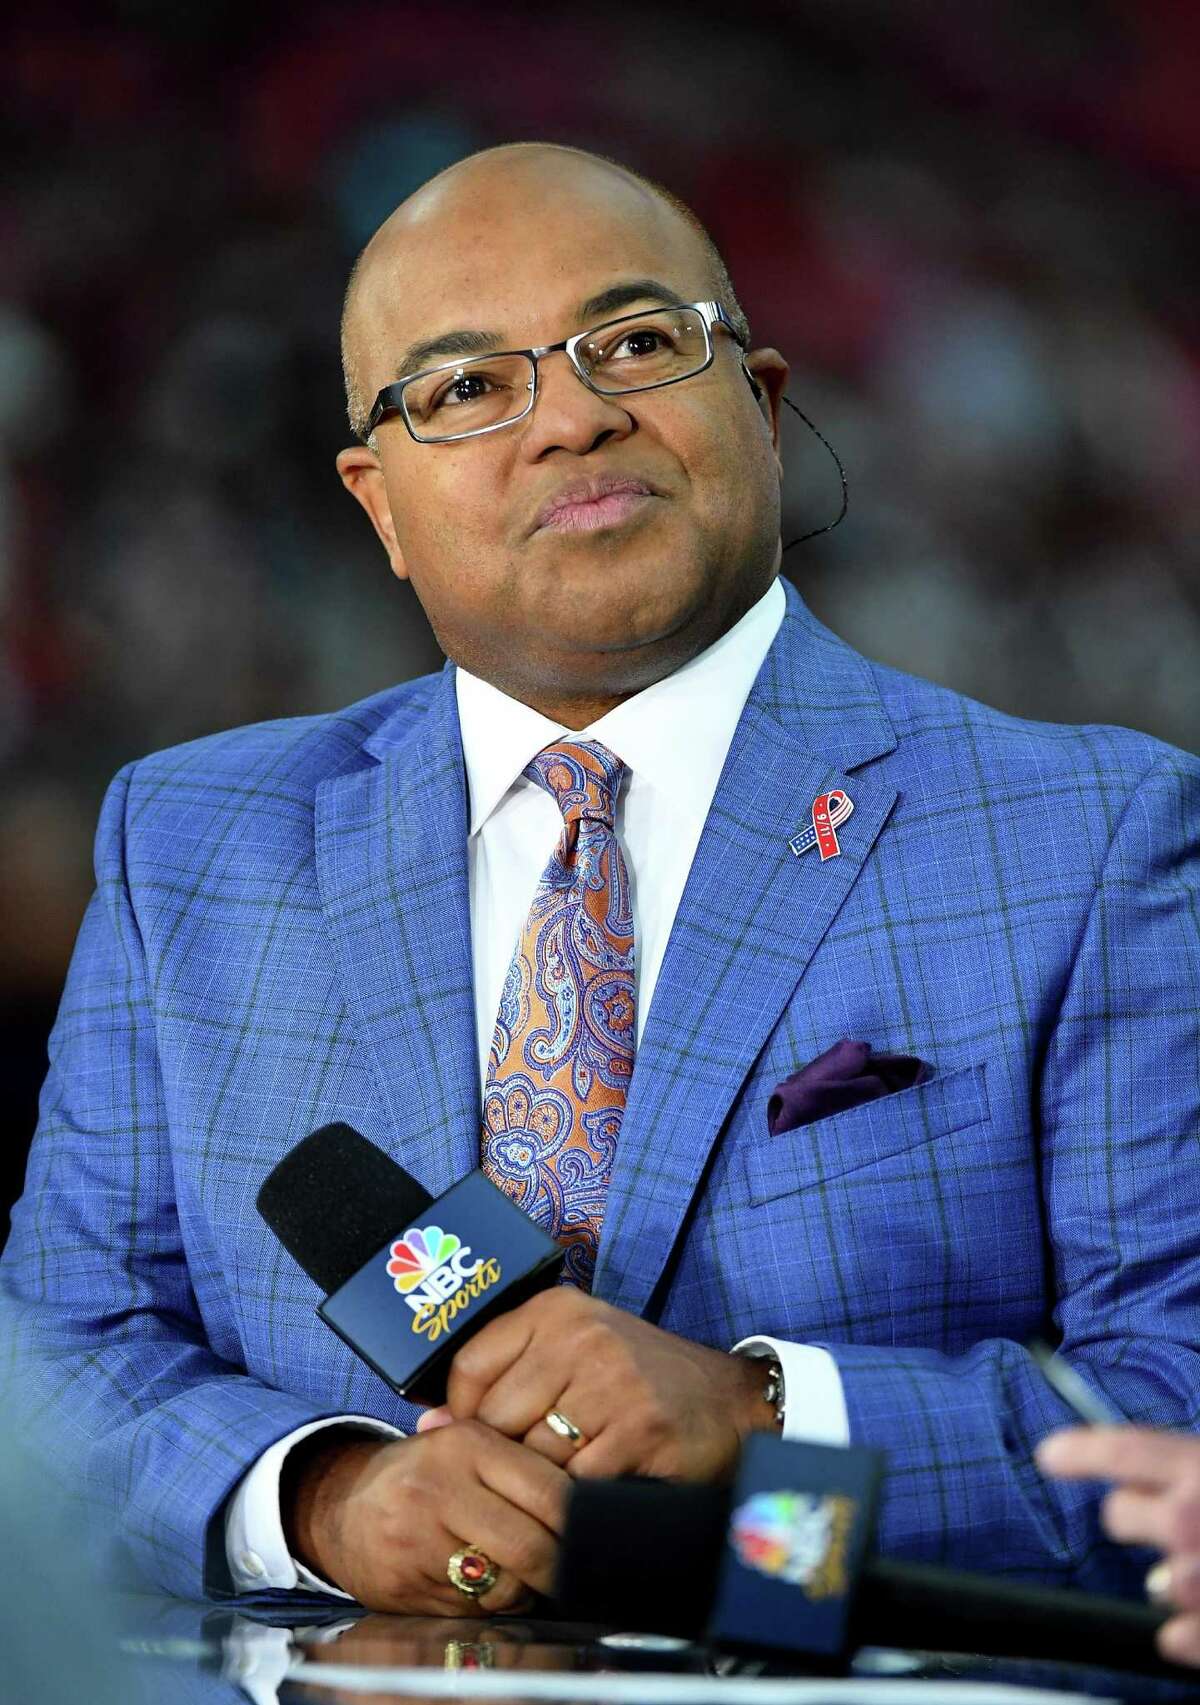 Sportscaster Mike Tirico sits on the Sunday Night Football set before the NFL game between the New England Patriots and the Arizona Cardinals at University of Phoenix Stadium on September 11, 2016 in Glendale, Arizona. New England won 23-21. (Photo by Ethan Miller/Getty Images)